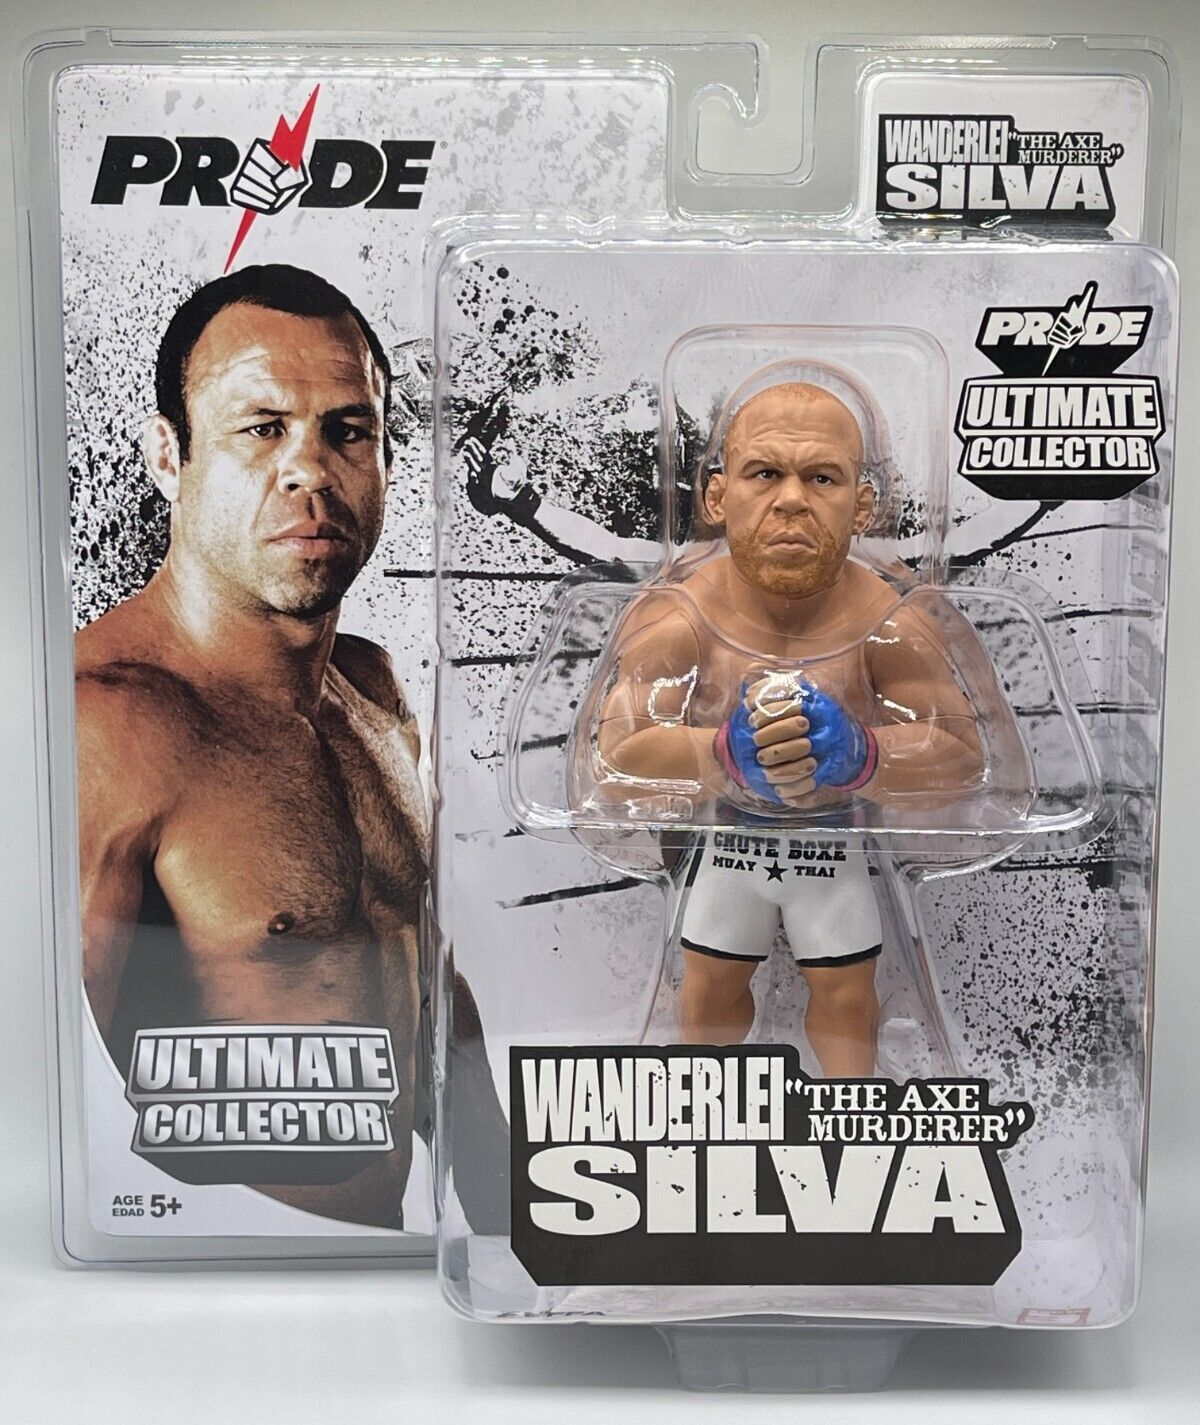 2010 Round 5 PRIDE Ultimate Collector Series 3 Wanderlei "The Axe Murderer" Silva [Chase]